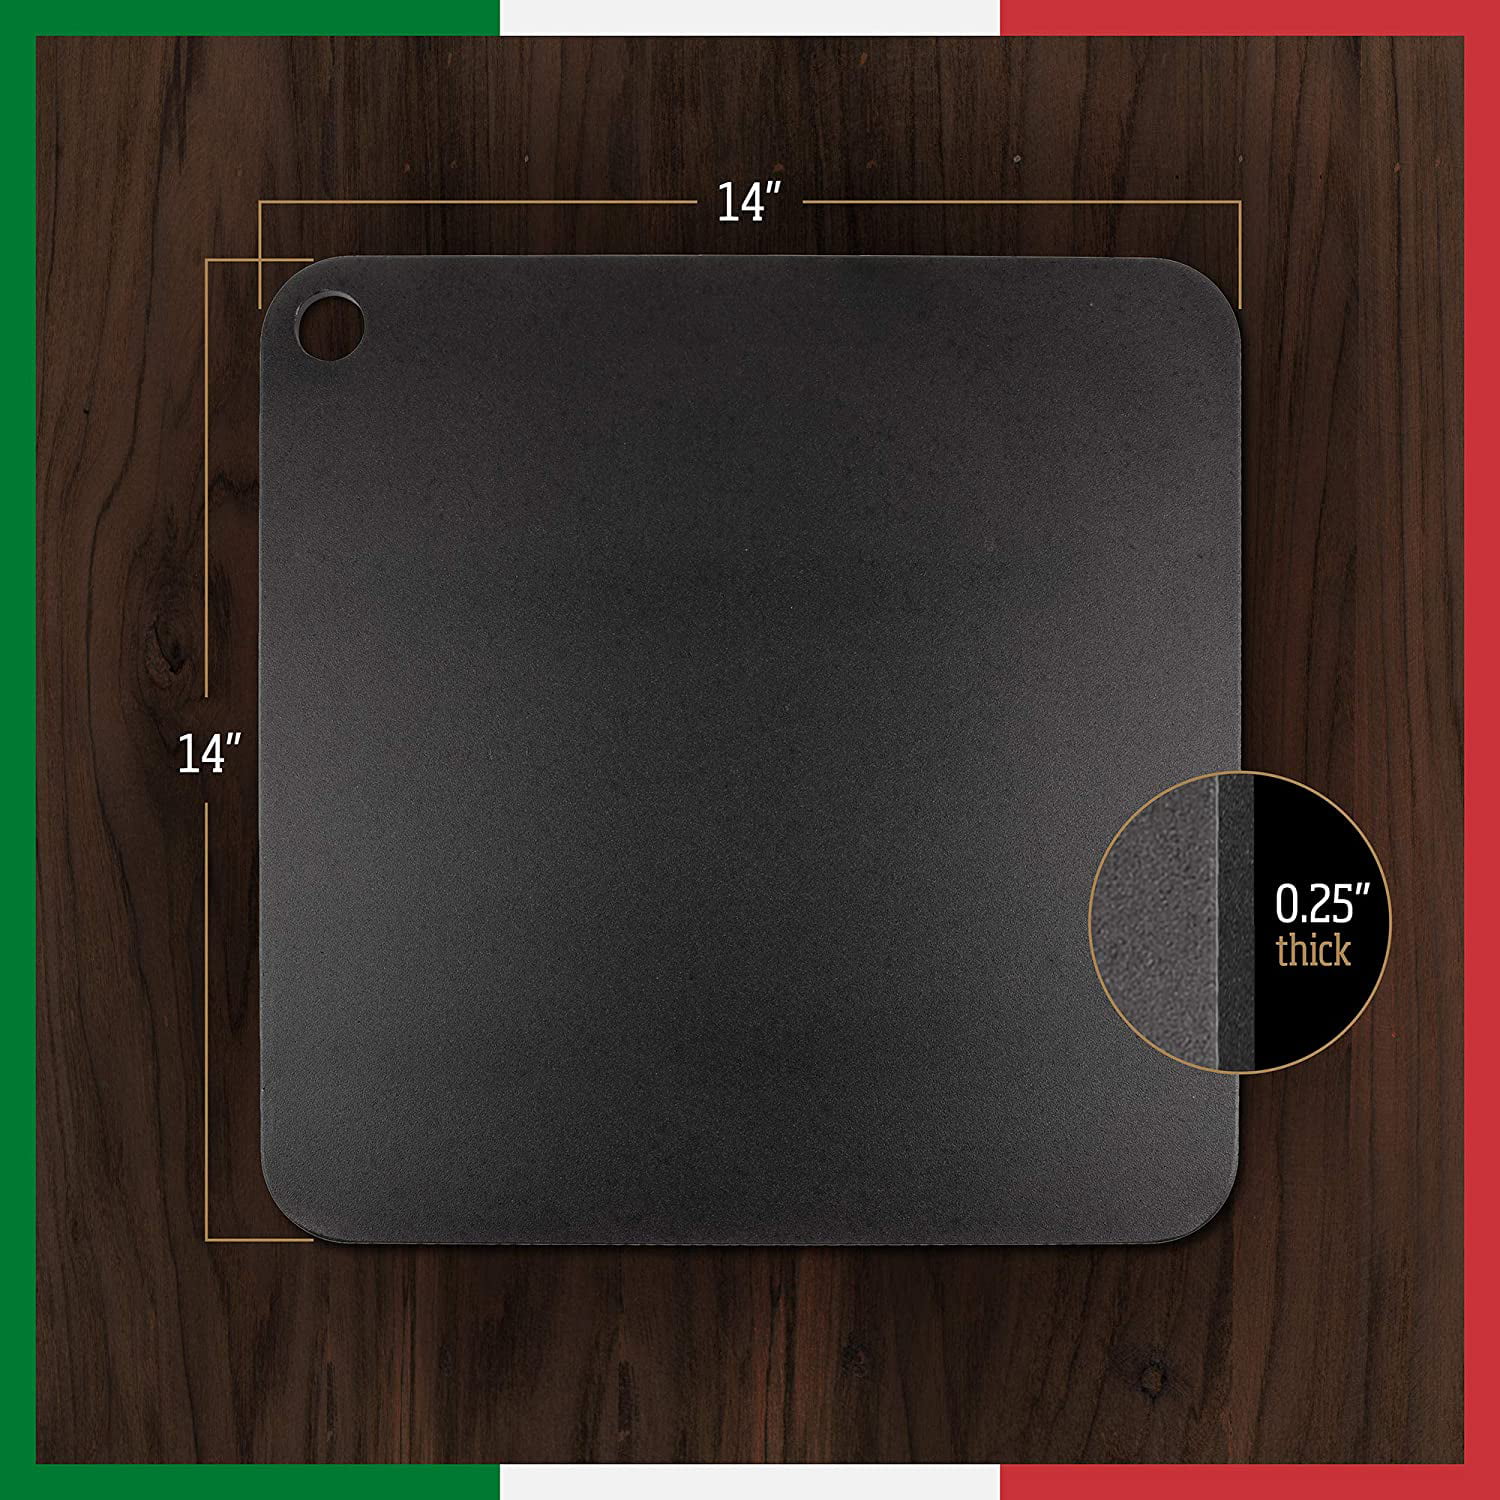 Impresa Pizza Steel for Oven - Durable Steel Platform with Finger Hole for  Baking Pizza and Bread - 14x14 inches - Great Alternative to Pizza Stone 